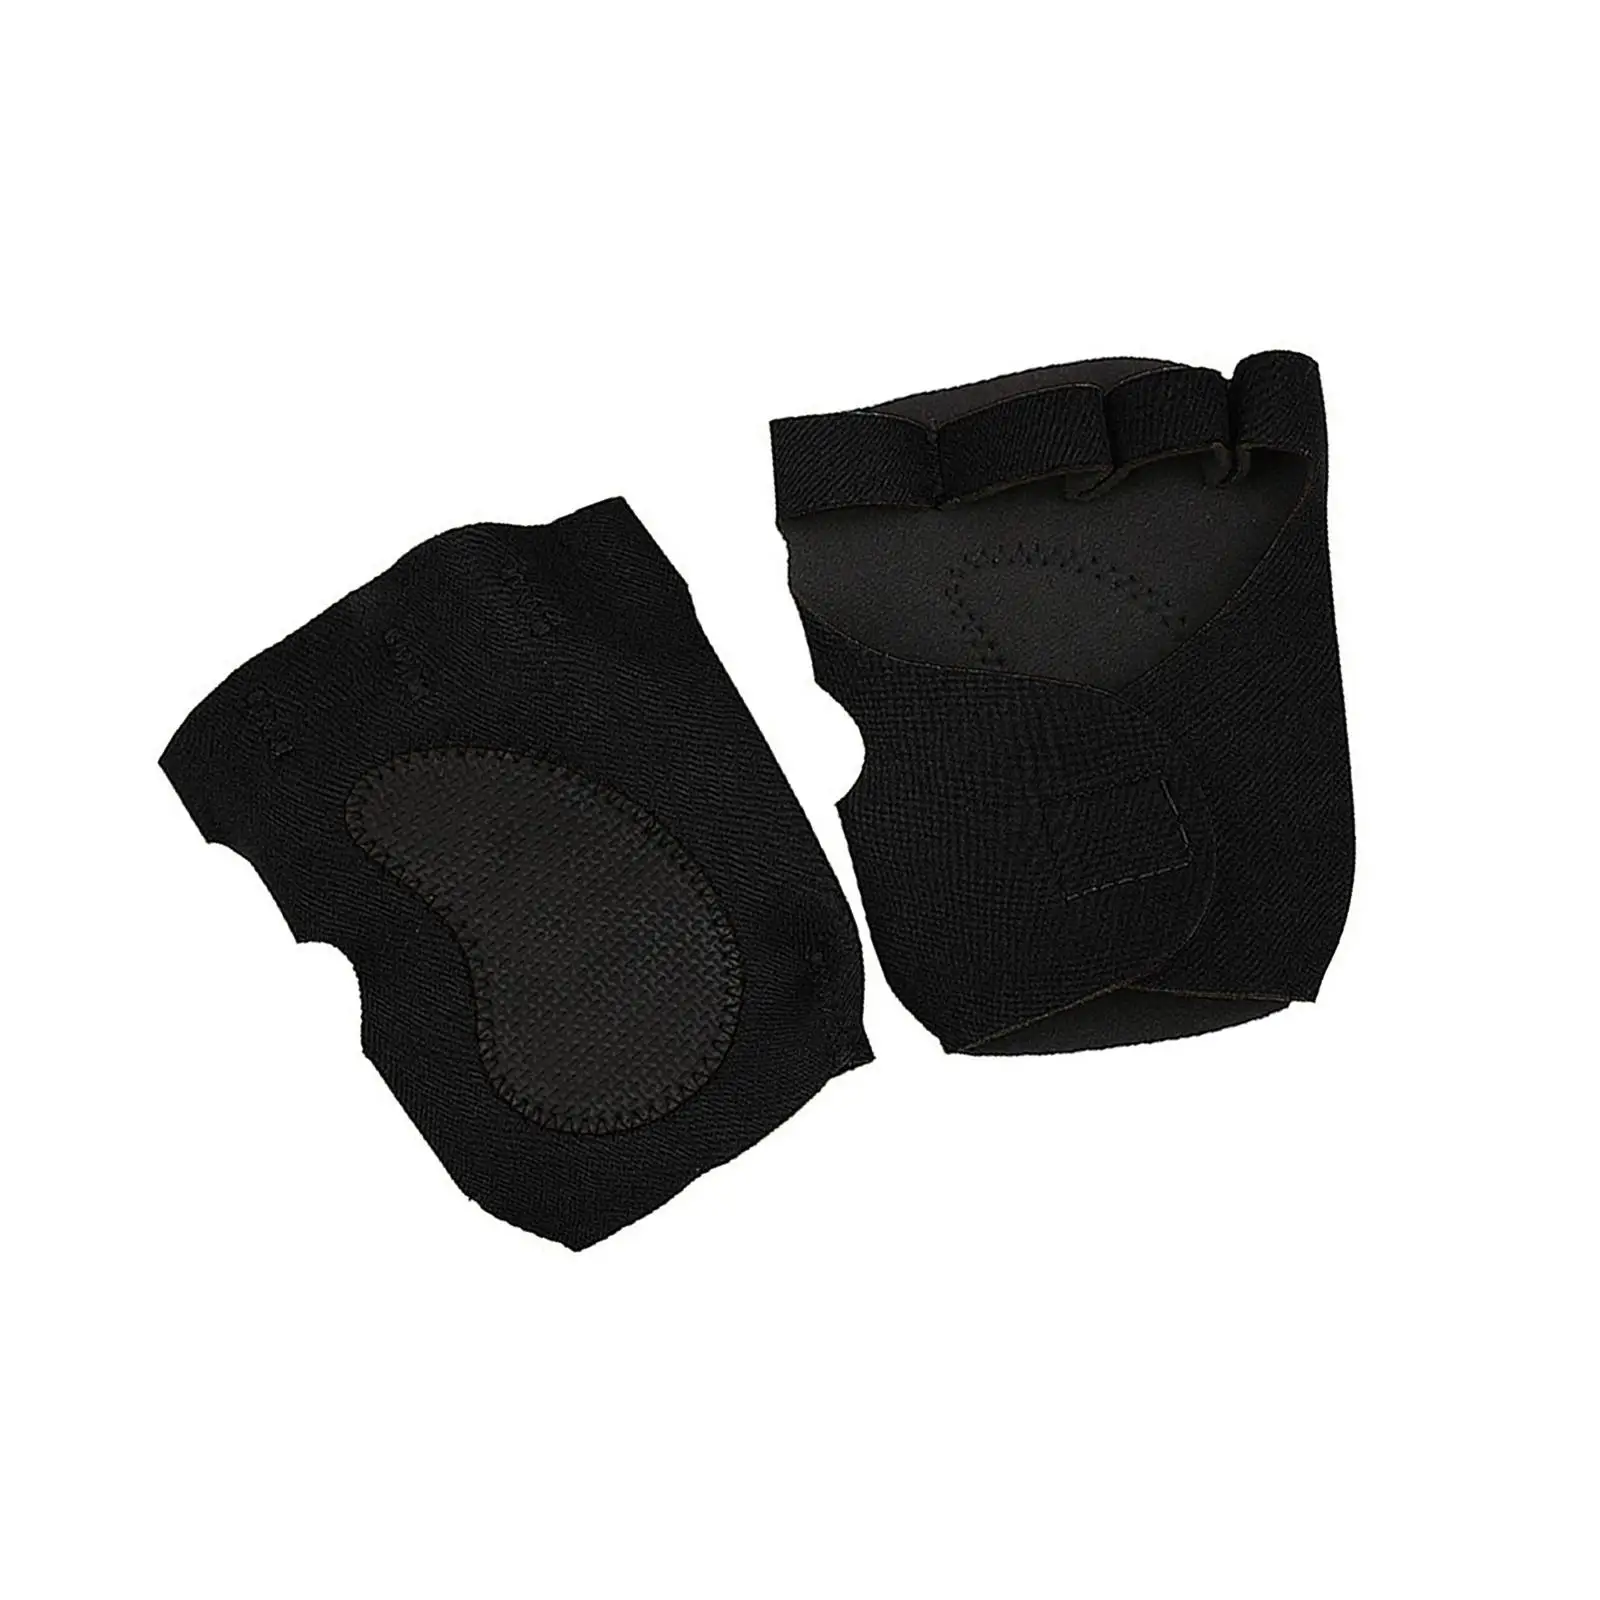 Workout Gloves Palm Protection Exercise Gloves Hand Guard Weight Lifting Gloves for Dumbbell Training Bodybuilding